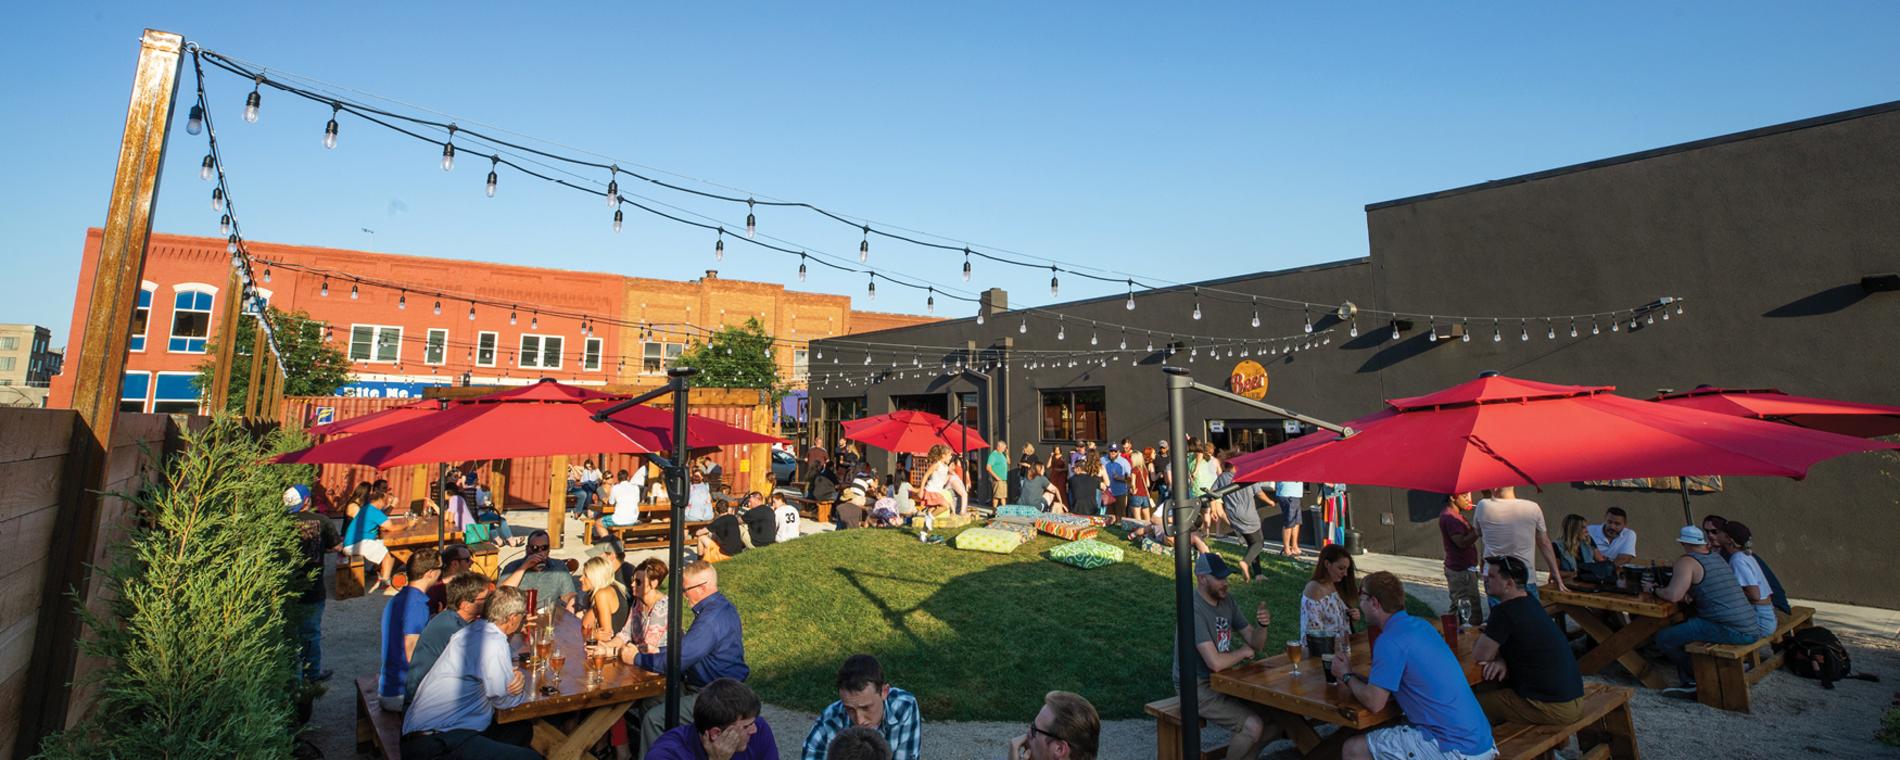 north park restaurants with outdoor seating